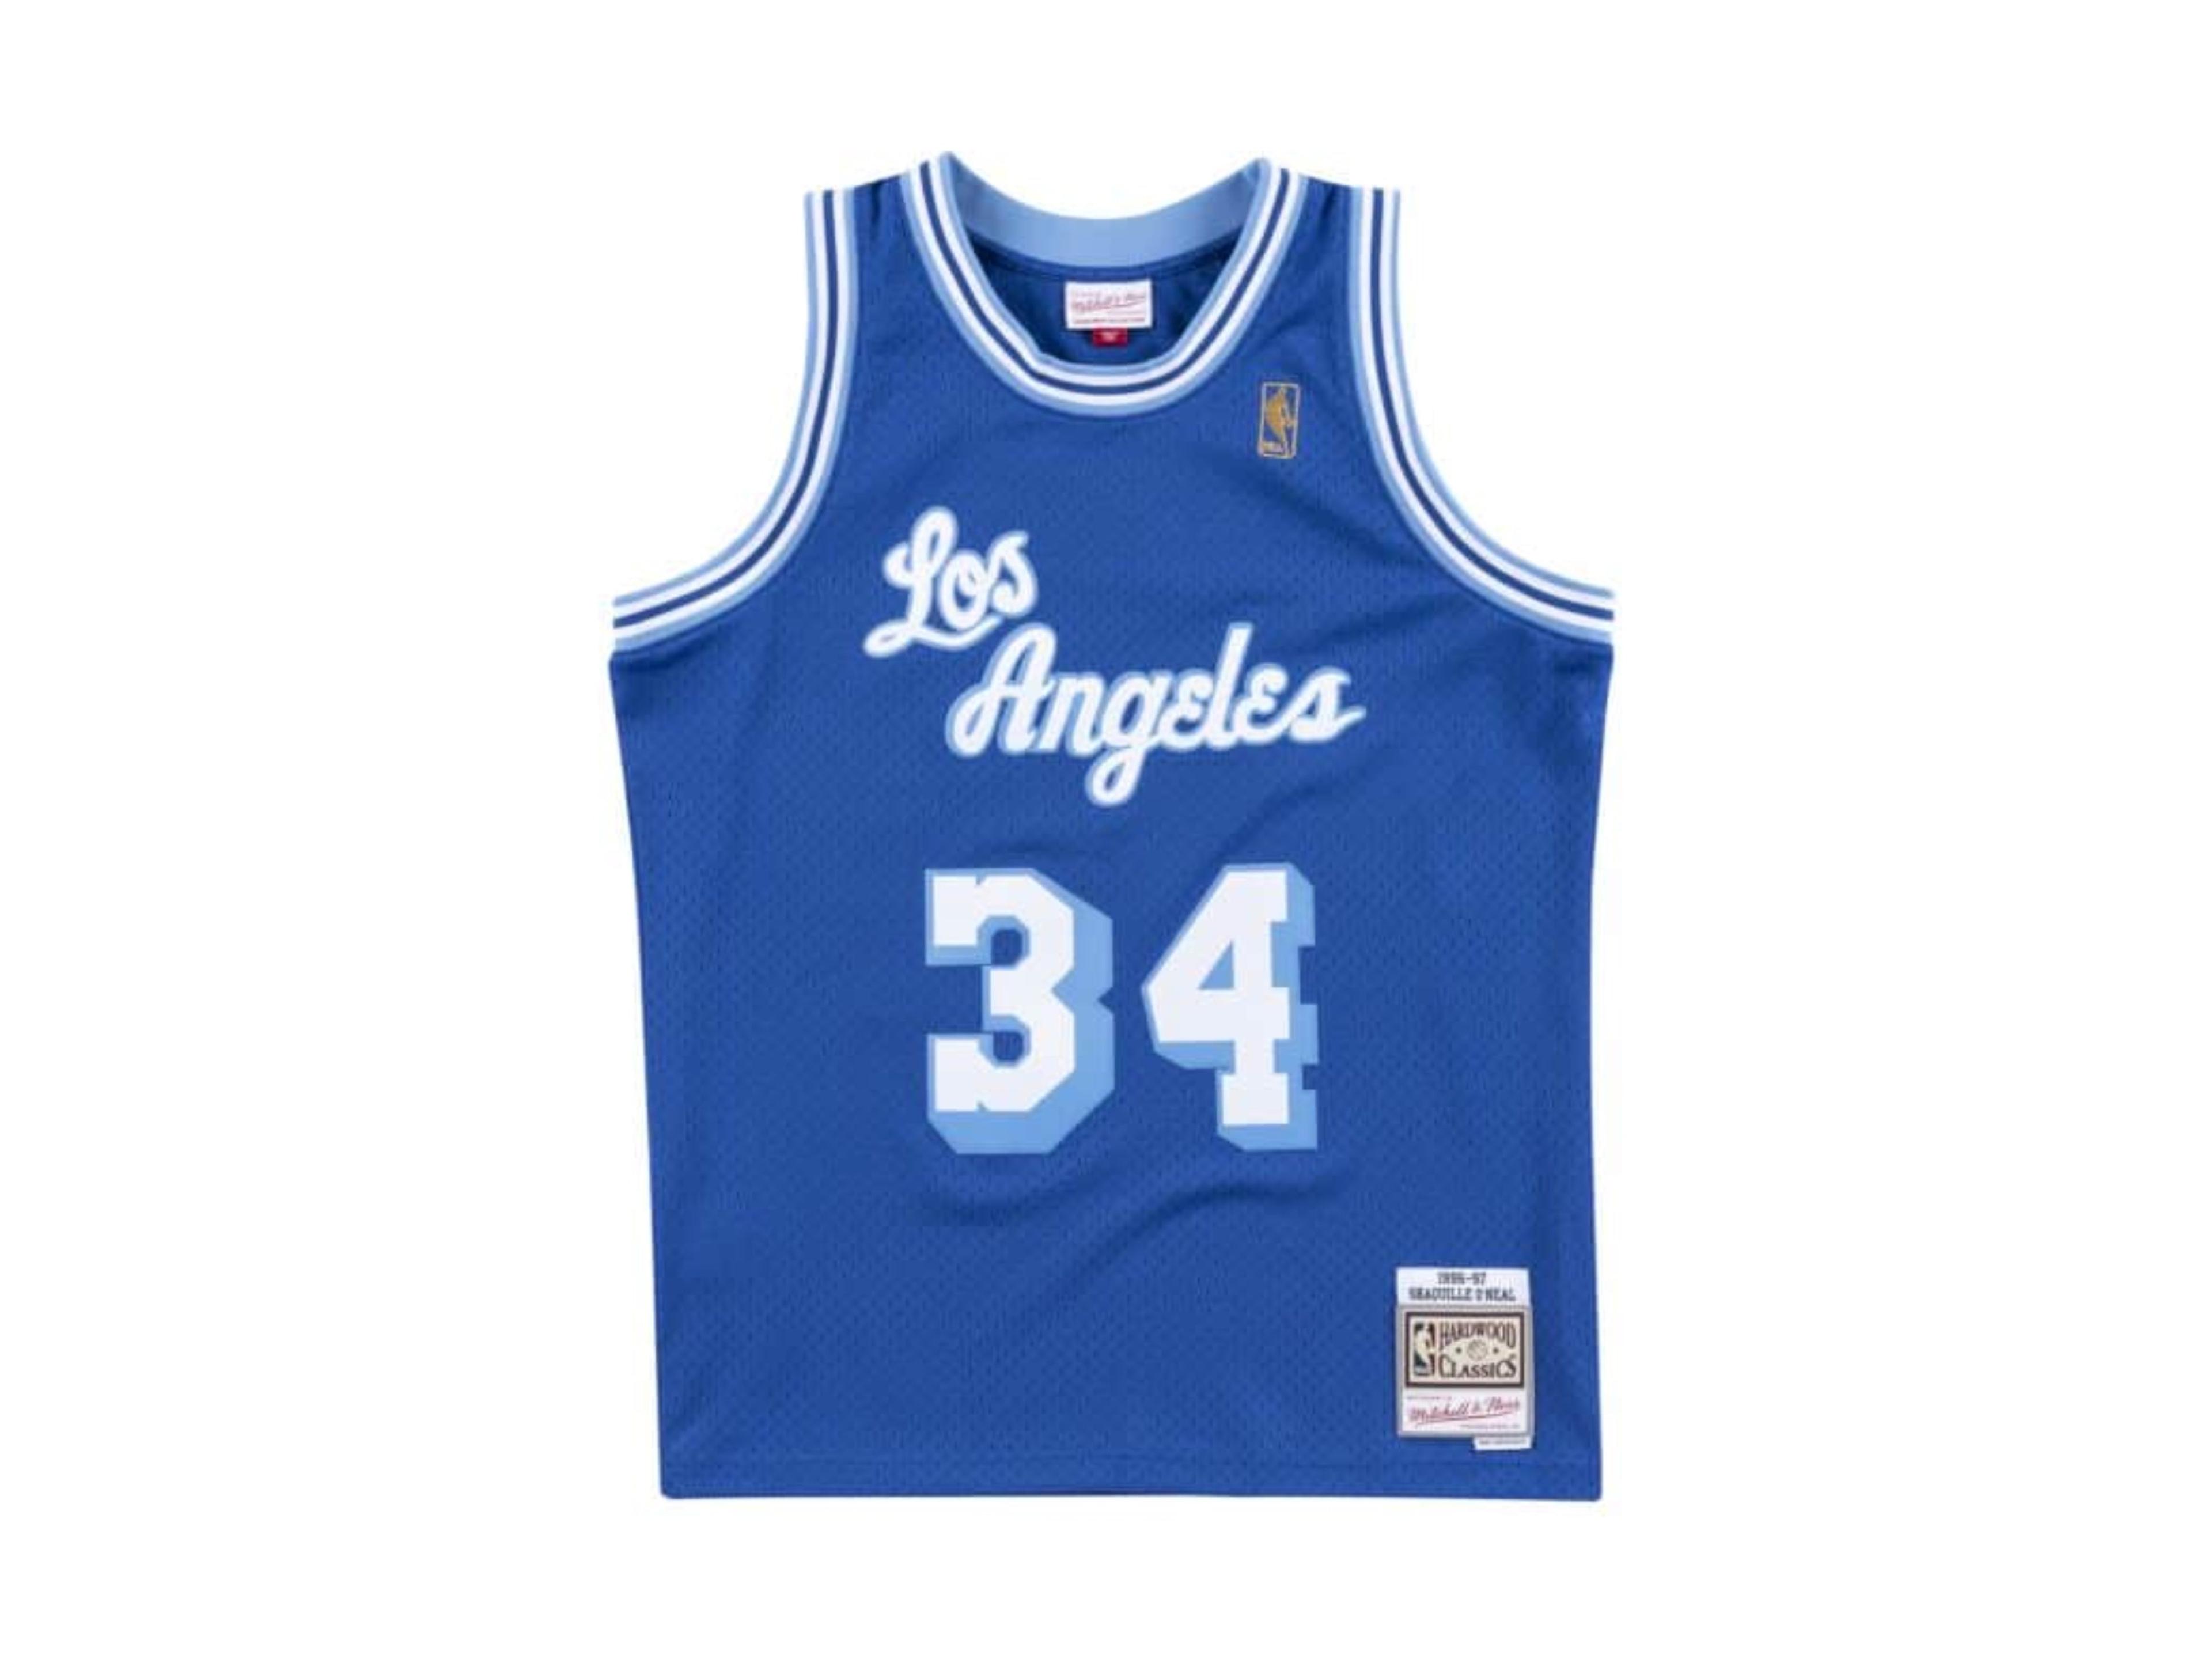 Mitchell & Ness NBA Los Angeles Lakers Jersey (Shaquille O'Neal)